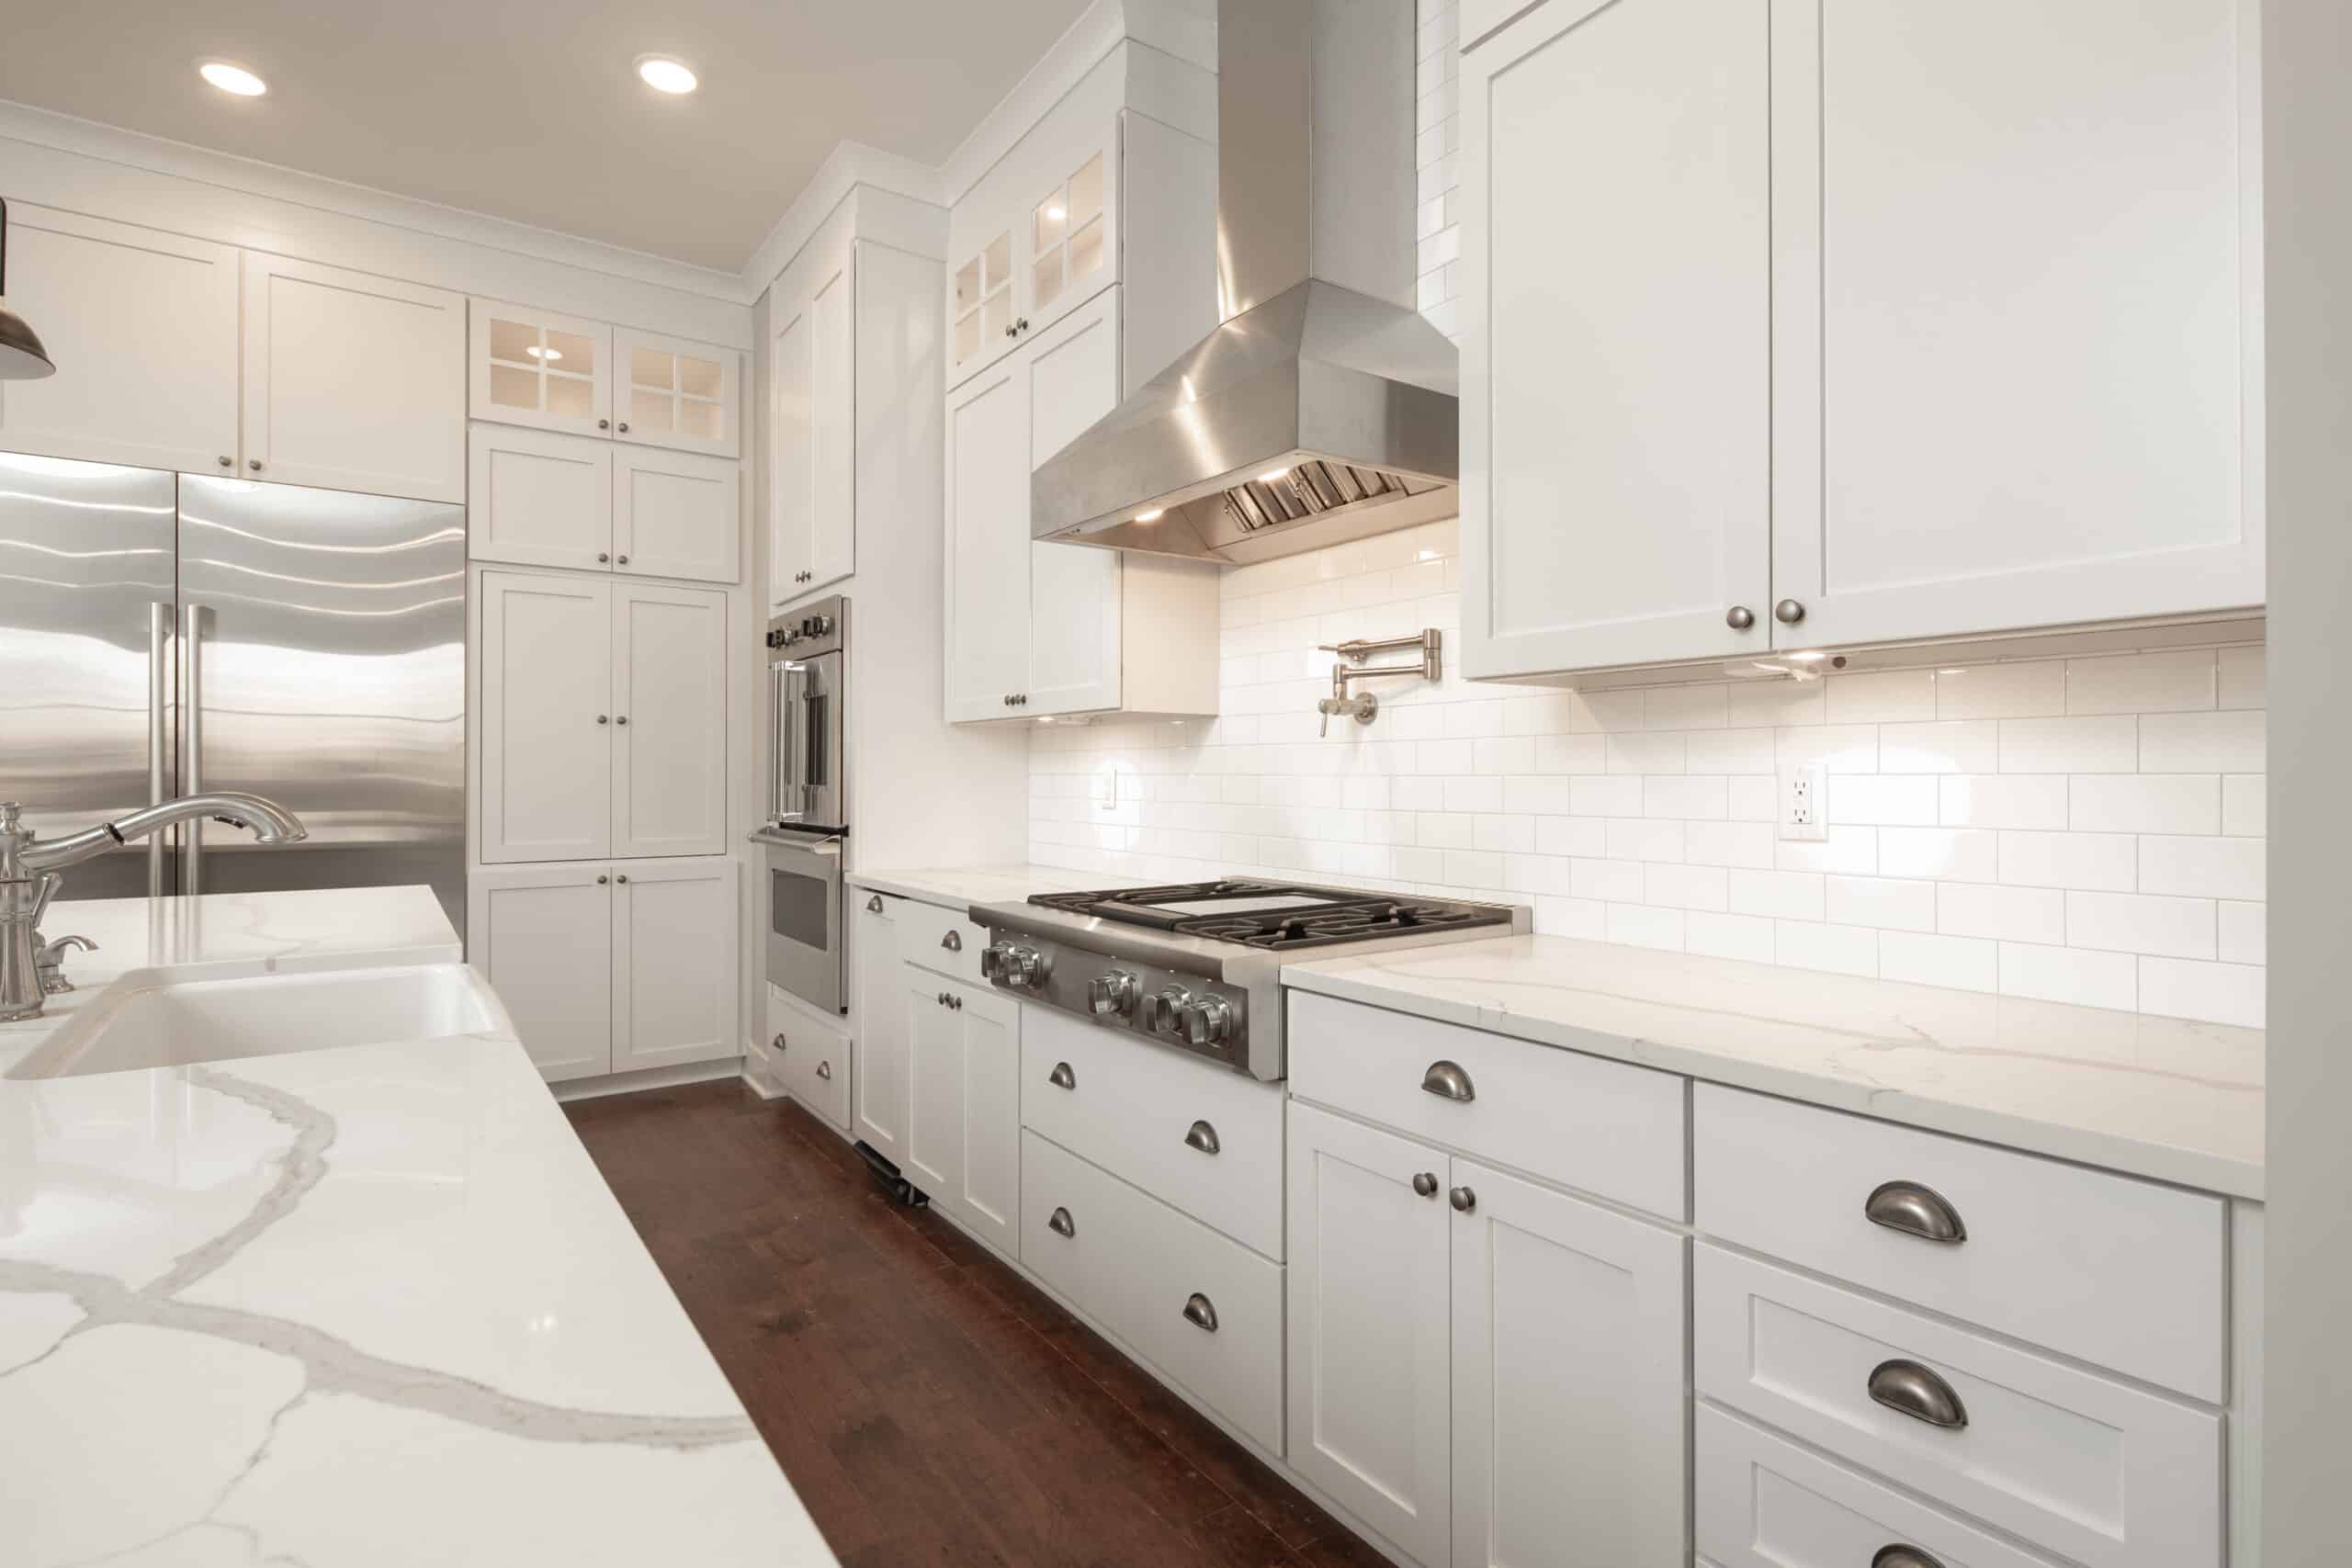 Clean White kitchen style with RTA Kitchen Cabinets